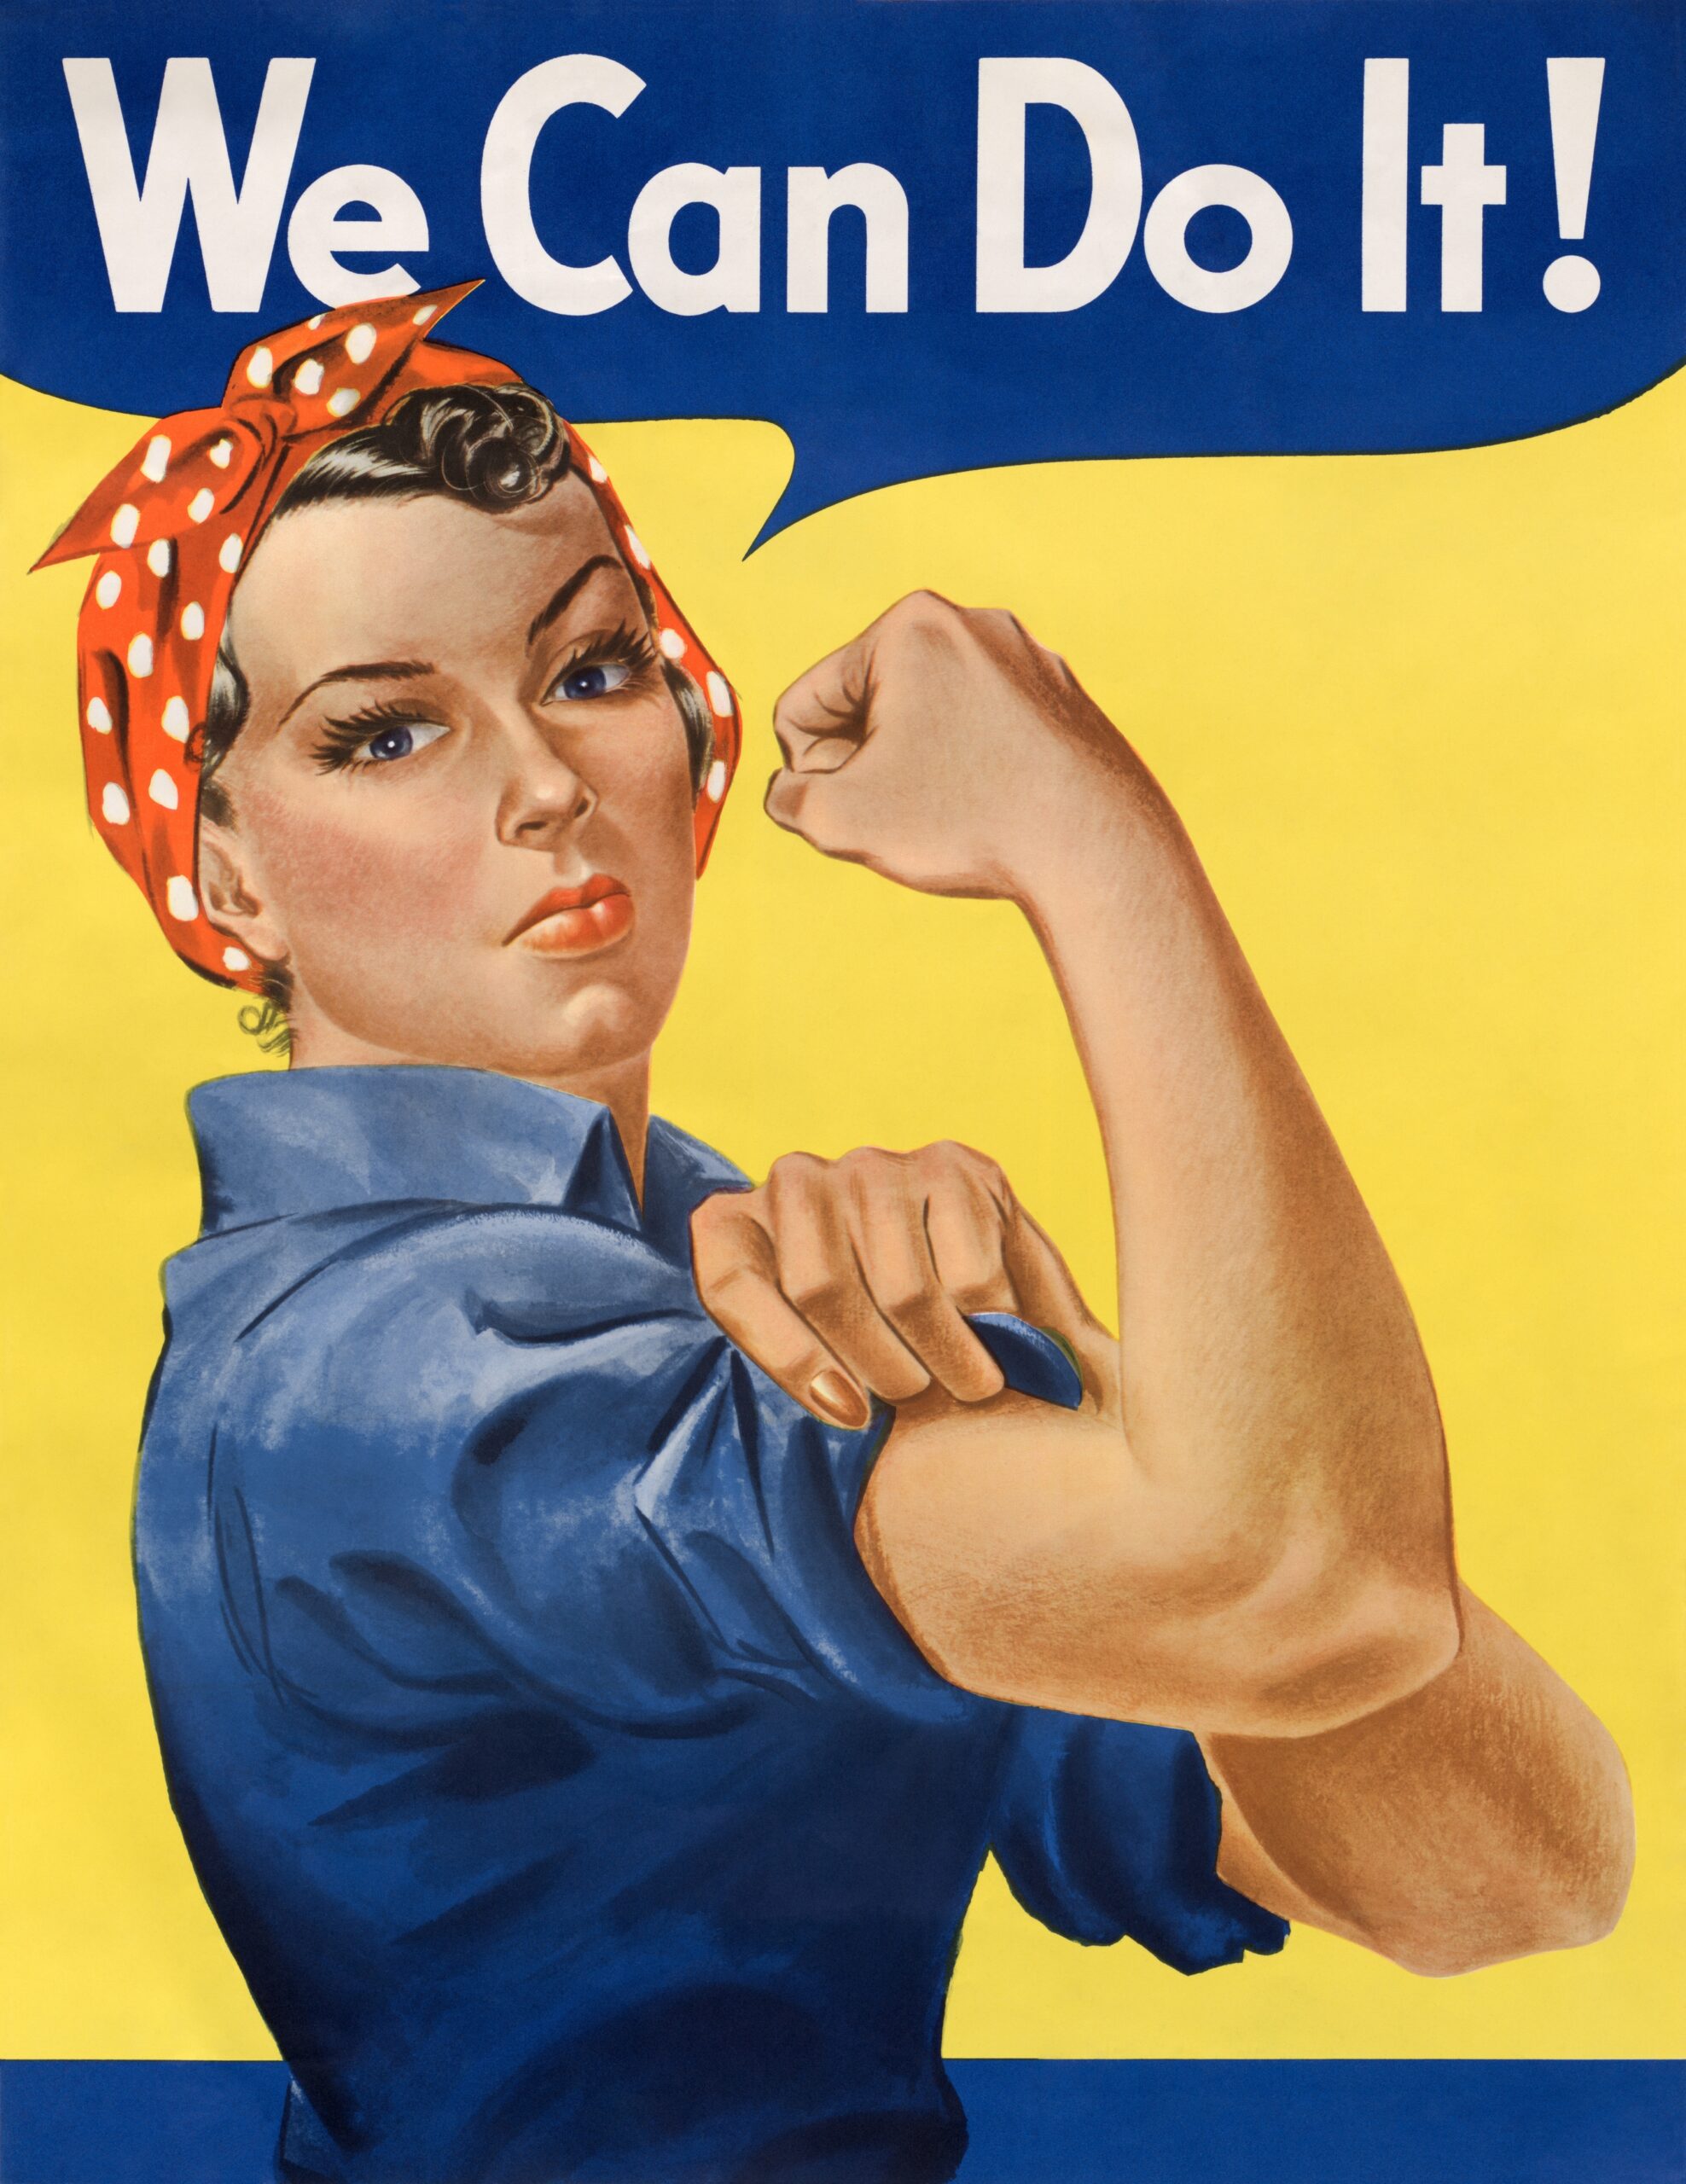 "We Can Do It!", also called "Rosie the Riveter" after the iconic figure of a strong female war production worker (1942-1945) lithograph poster by J. Howard Miller. Original public domain image from Wikimedia Commons.